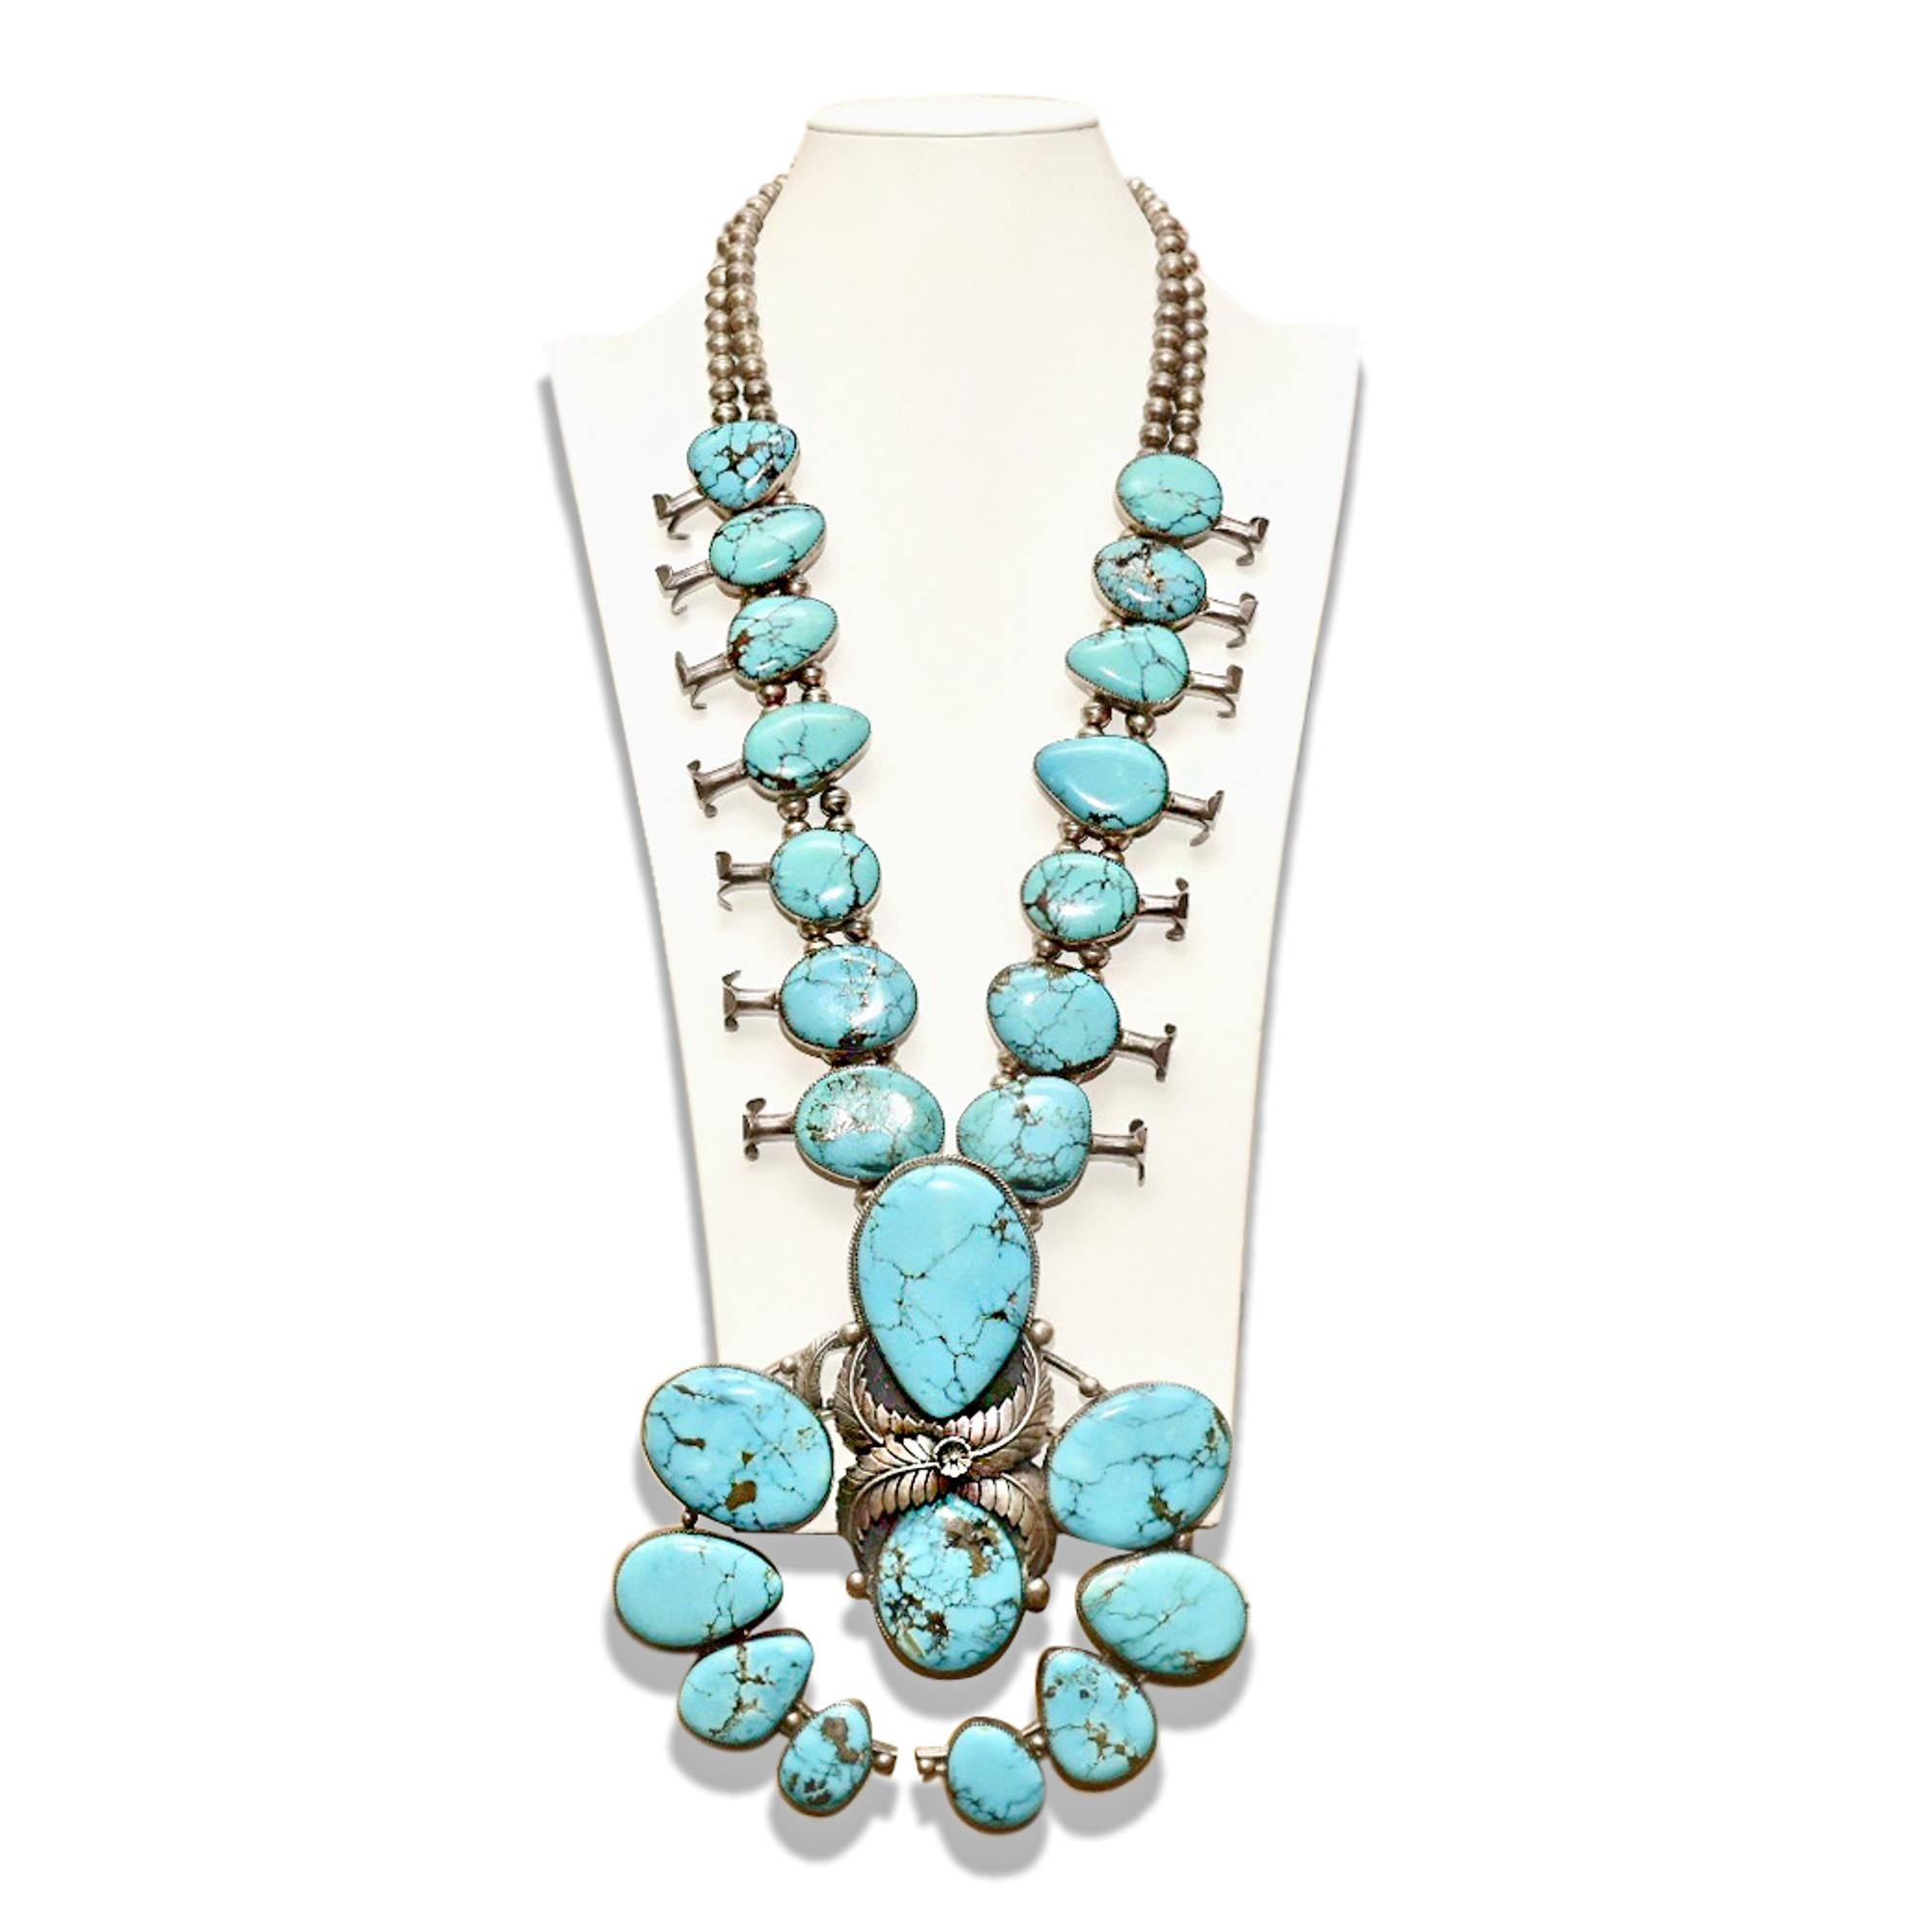 An incredible Old Pawn Native American squash blossom necklace with over 20 natural blue turquoise stones. Staggering in size and beauty, this necklace was most likely designed for a ceremonial powwow and looks like a museum-quality display piece.